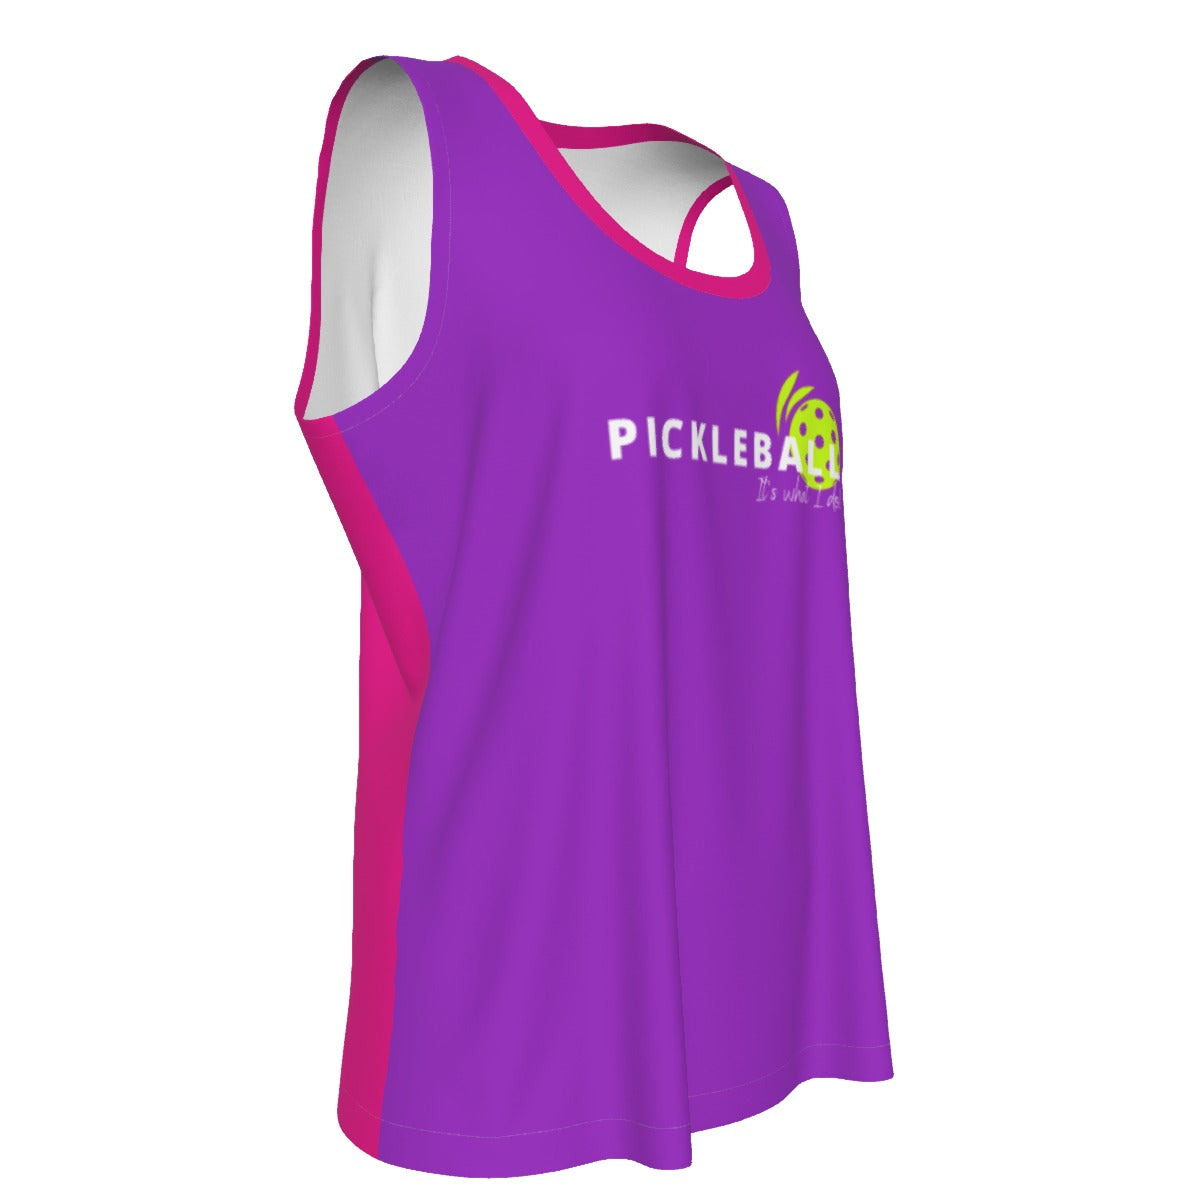 Pickleball It's what I do - Sports Tank Top by Dizzy Pickle - Purple/Pink